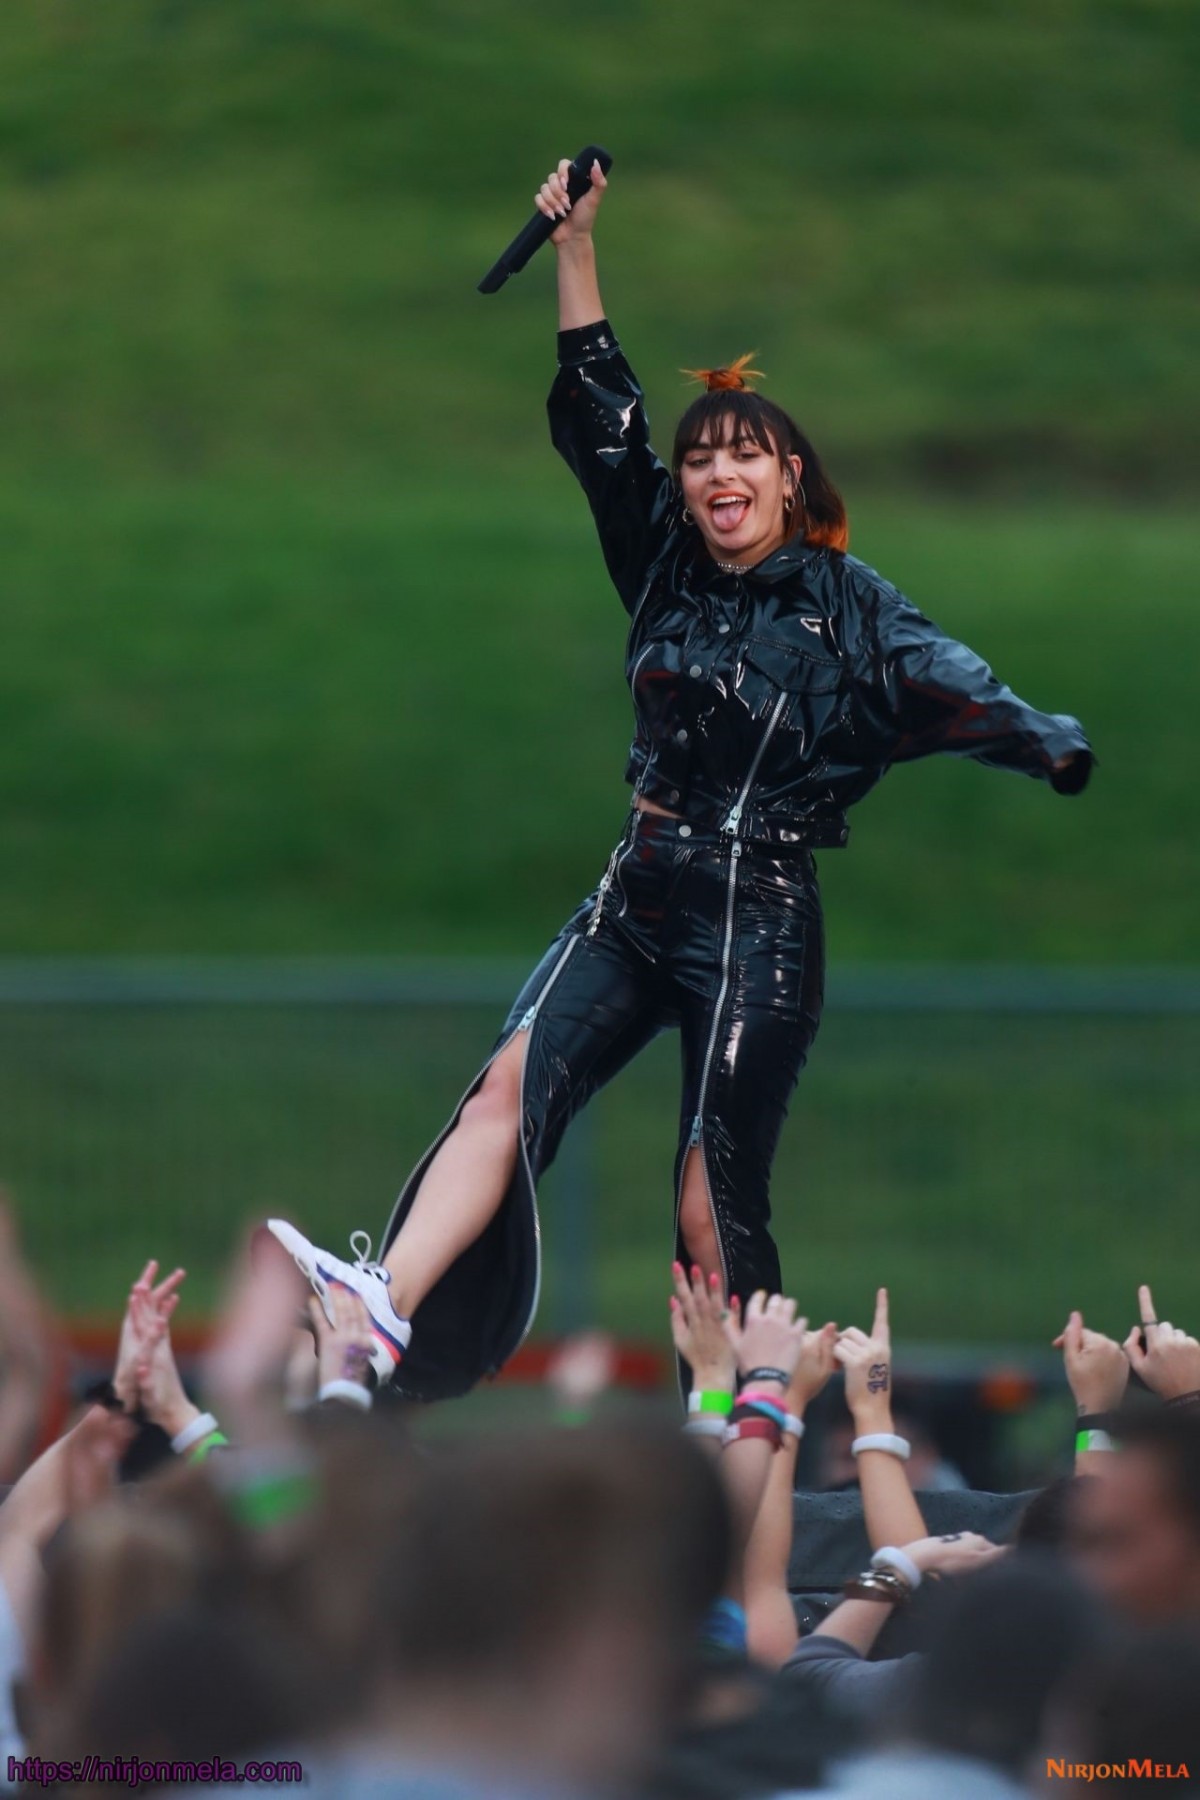 charli-xcx-and-georgia-nott-performs-in-auckland-11-09-2018-0.jpg